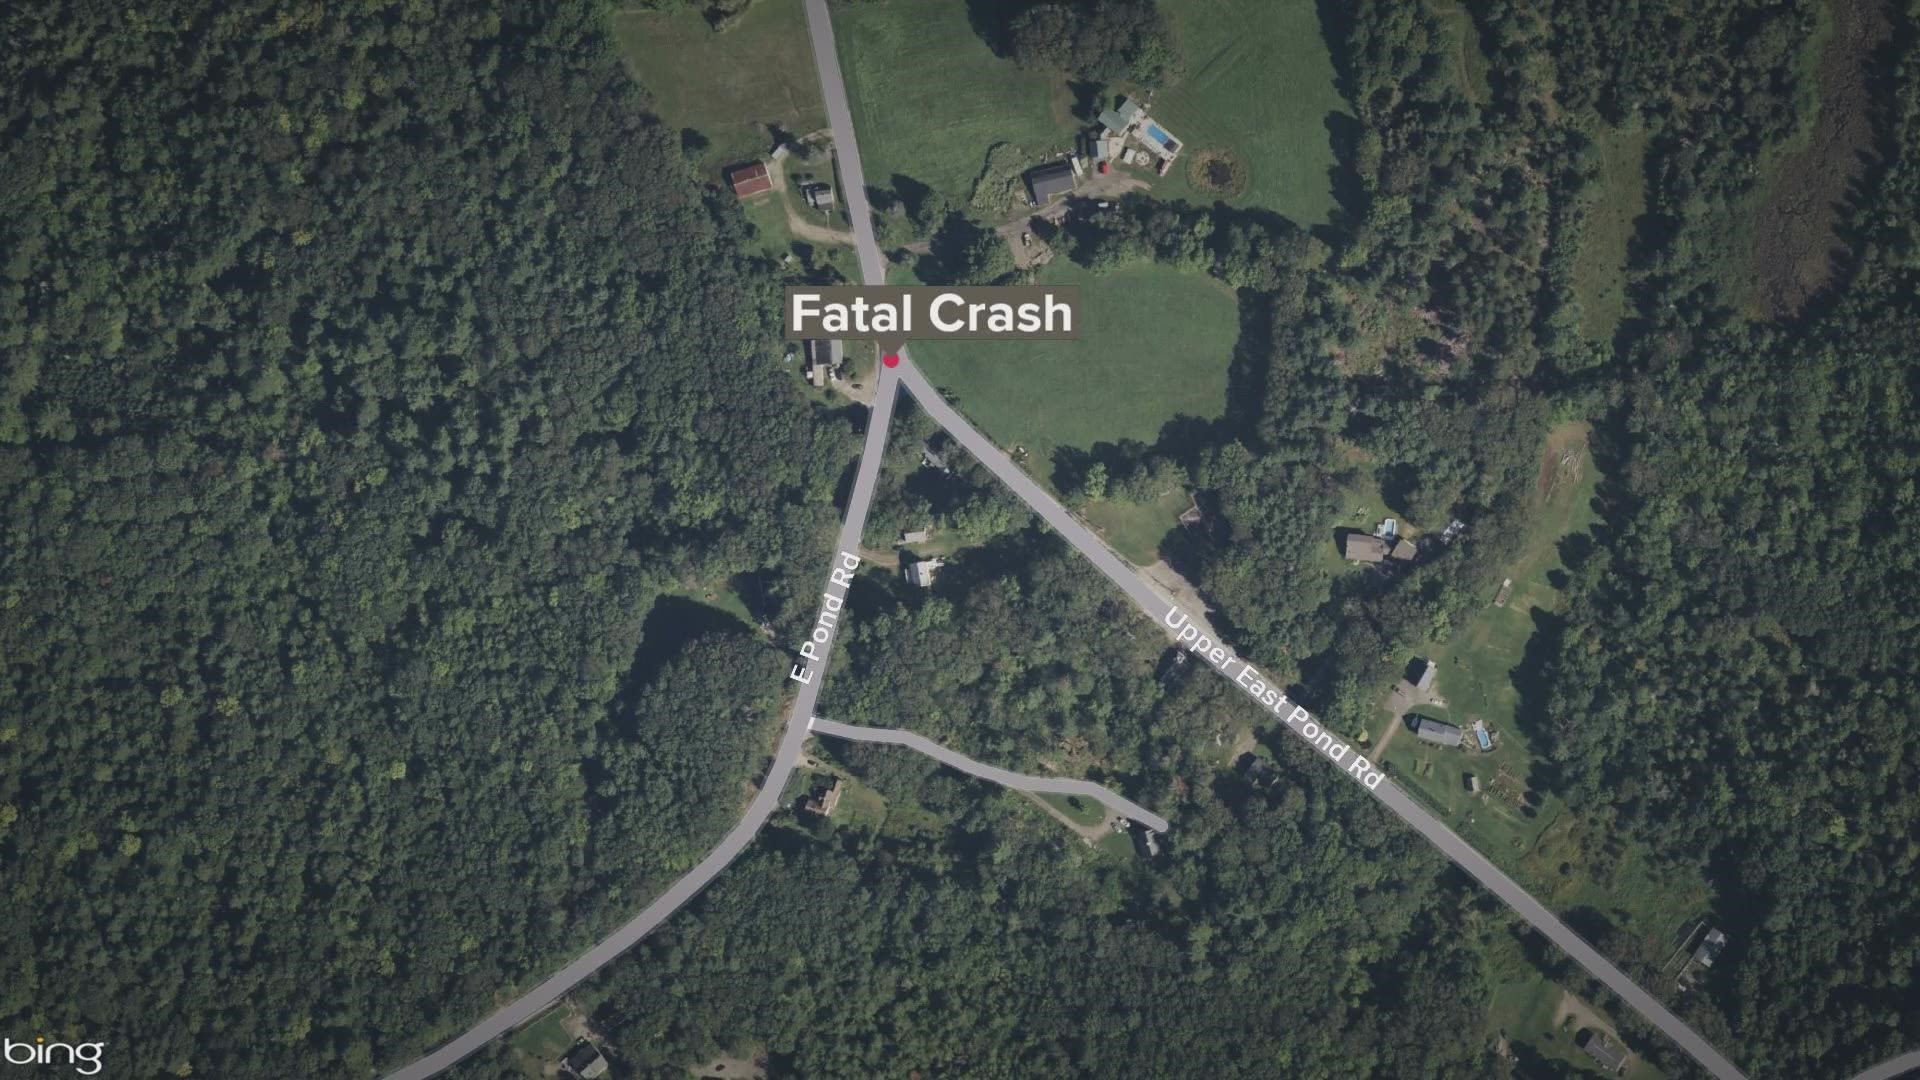 Sharon Moody, 68, of Nobleboro, died Tuesday afternoon in a crash on East Pond Road.